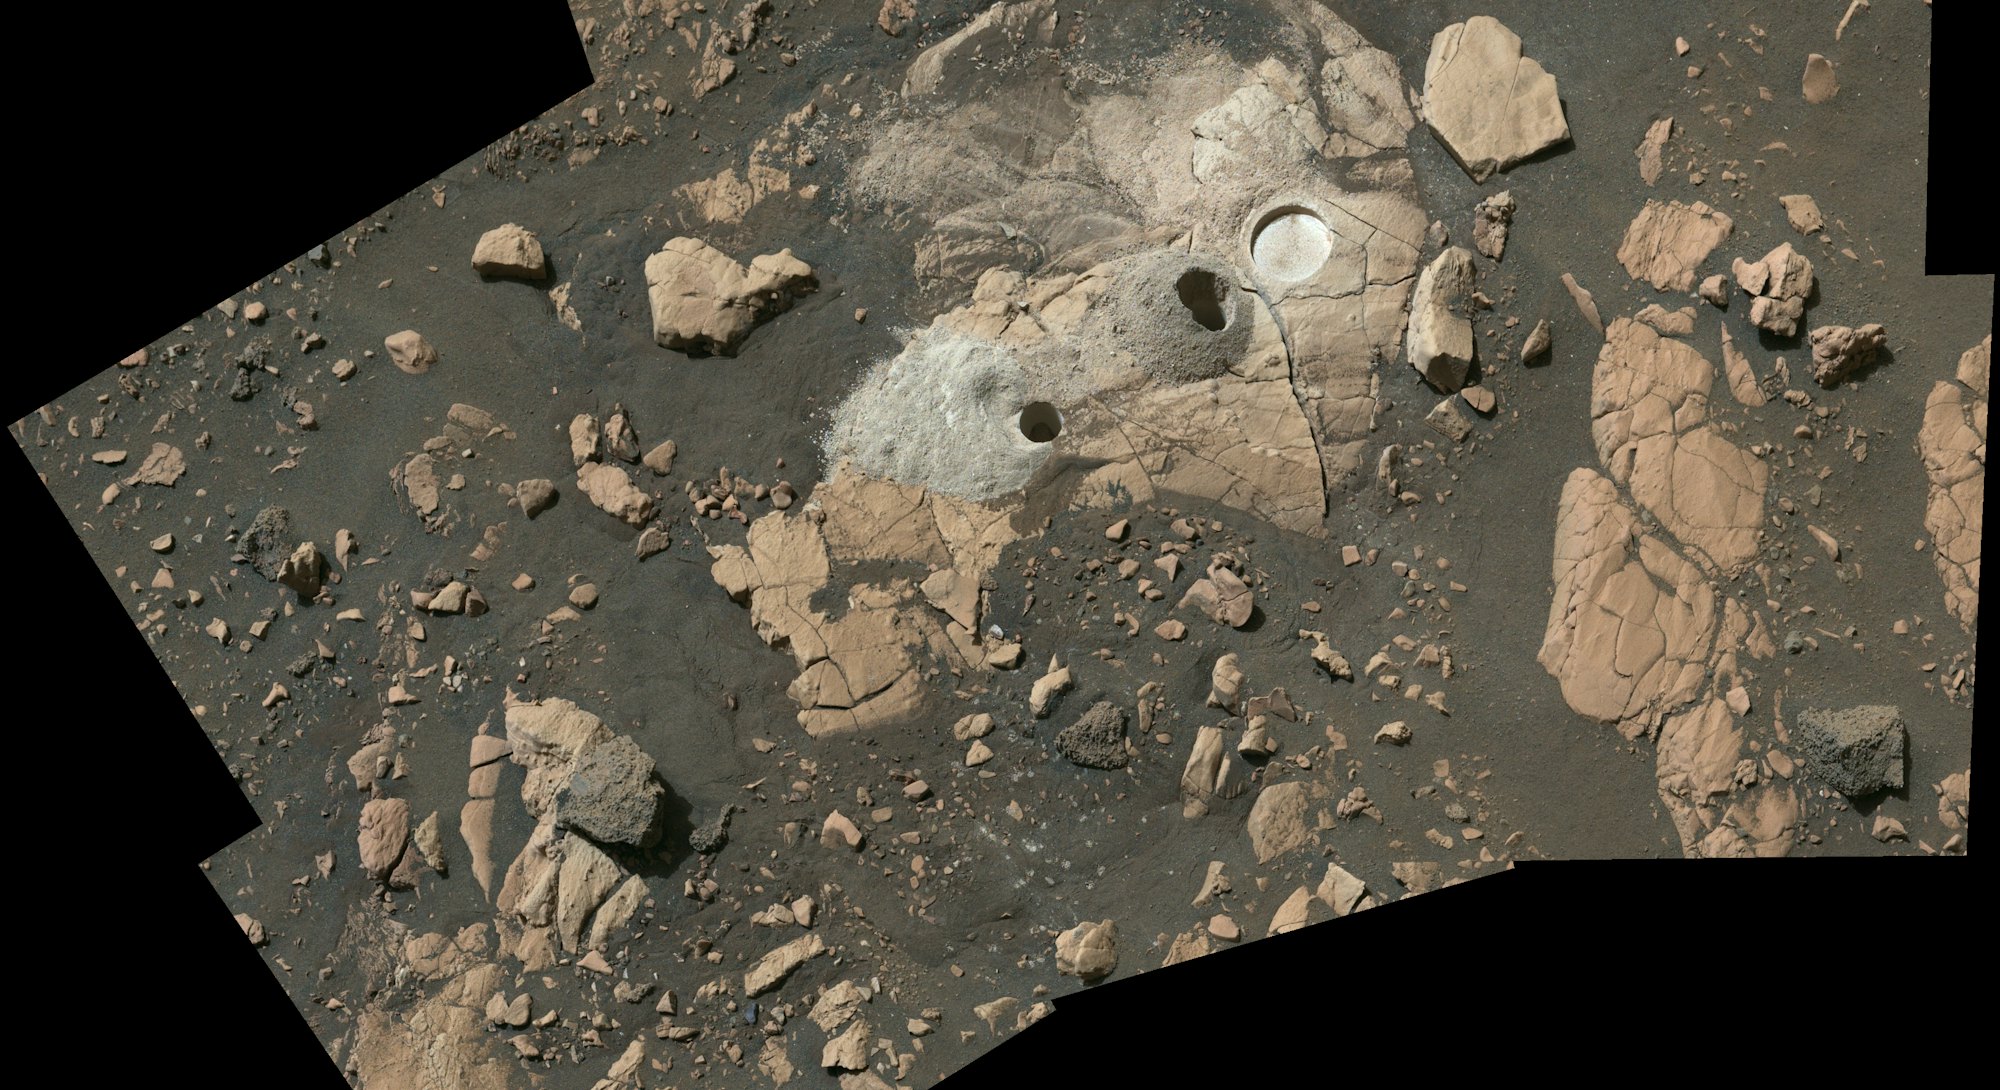 Composed of multiple images from NASA’s Perseverance Mars rover, this mosaic shows a rocky outcrop c...